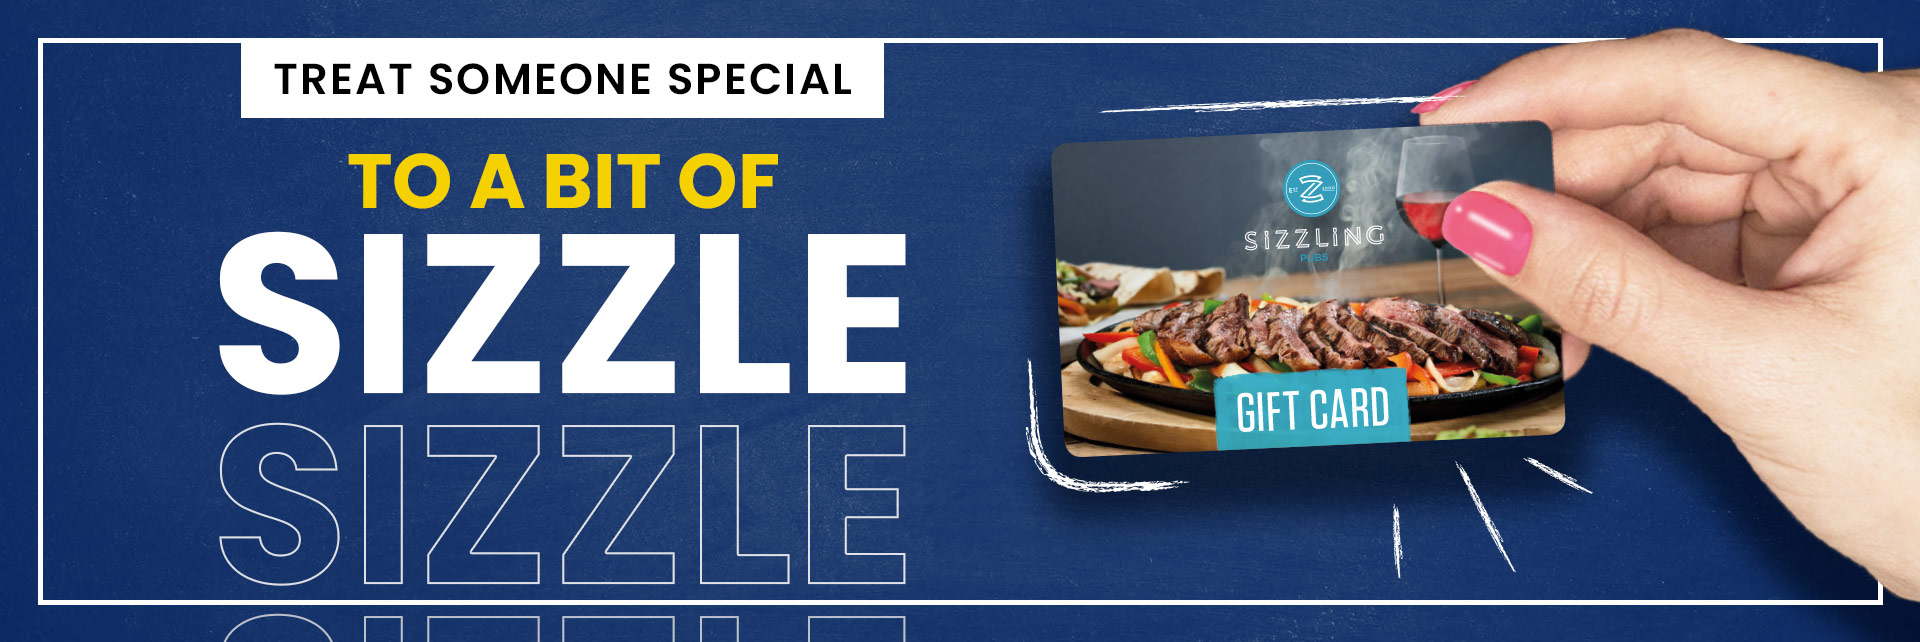 Sizzling Pubs Gift Card at The General Roy in Feltham